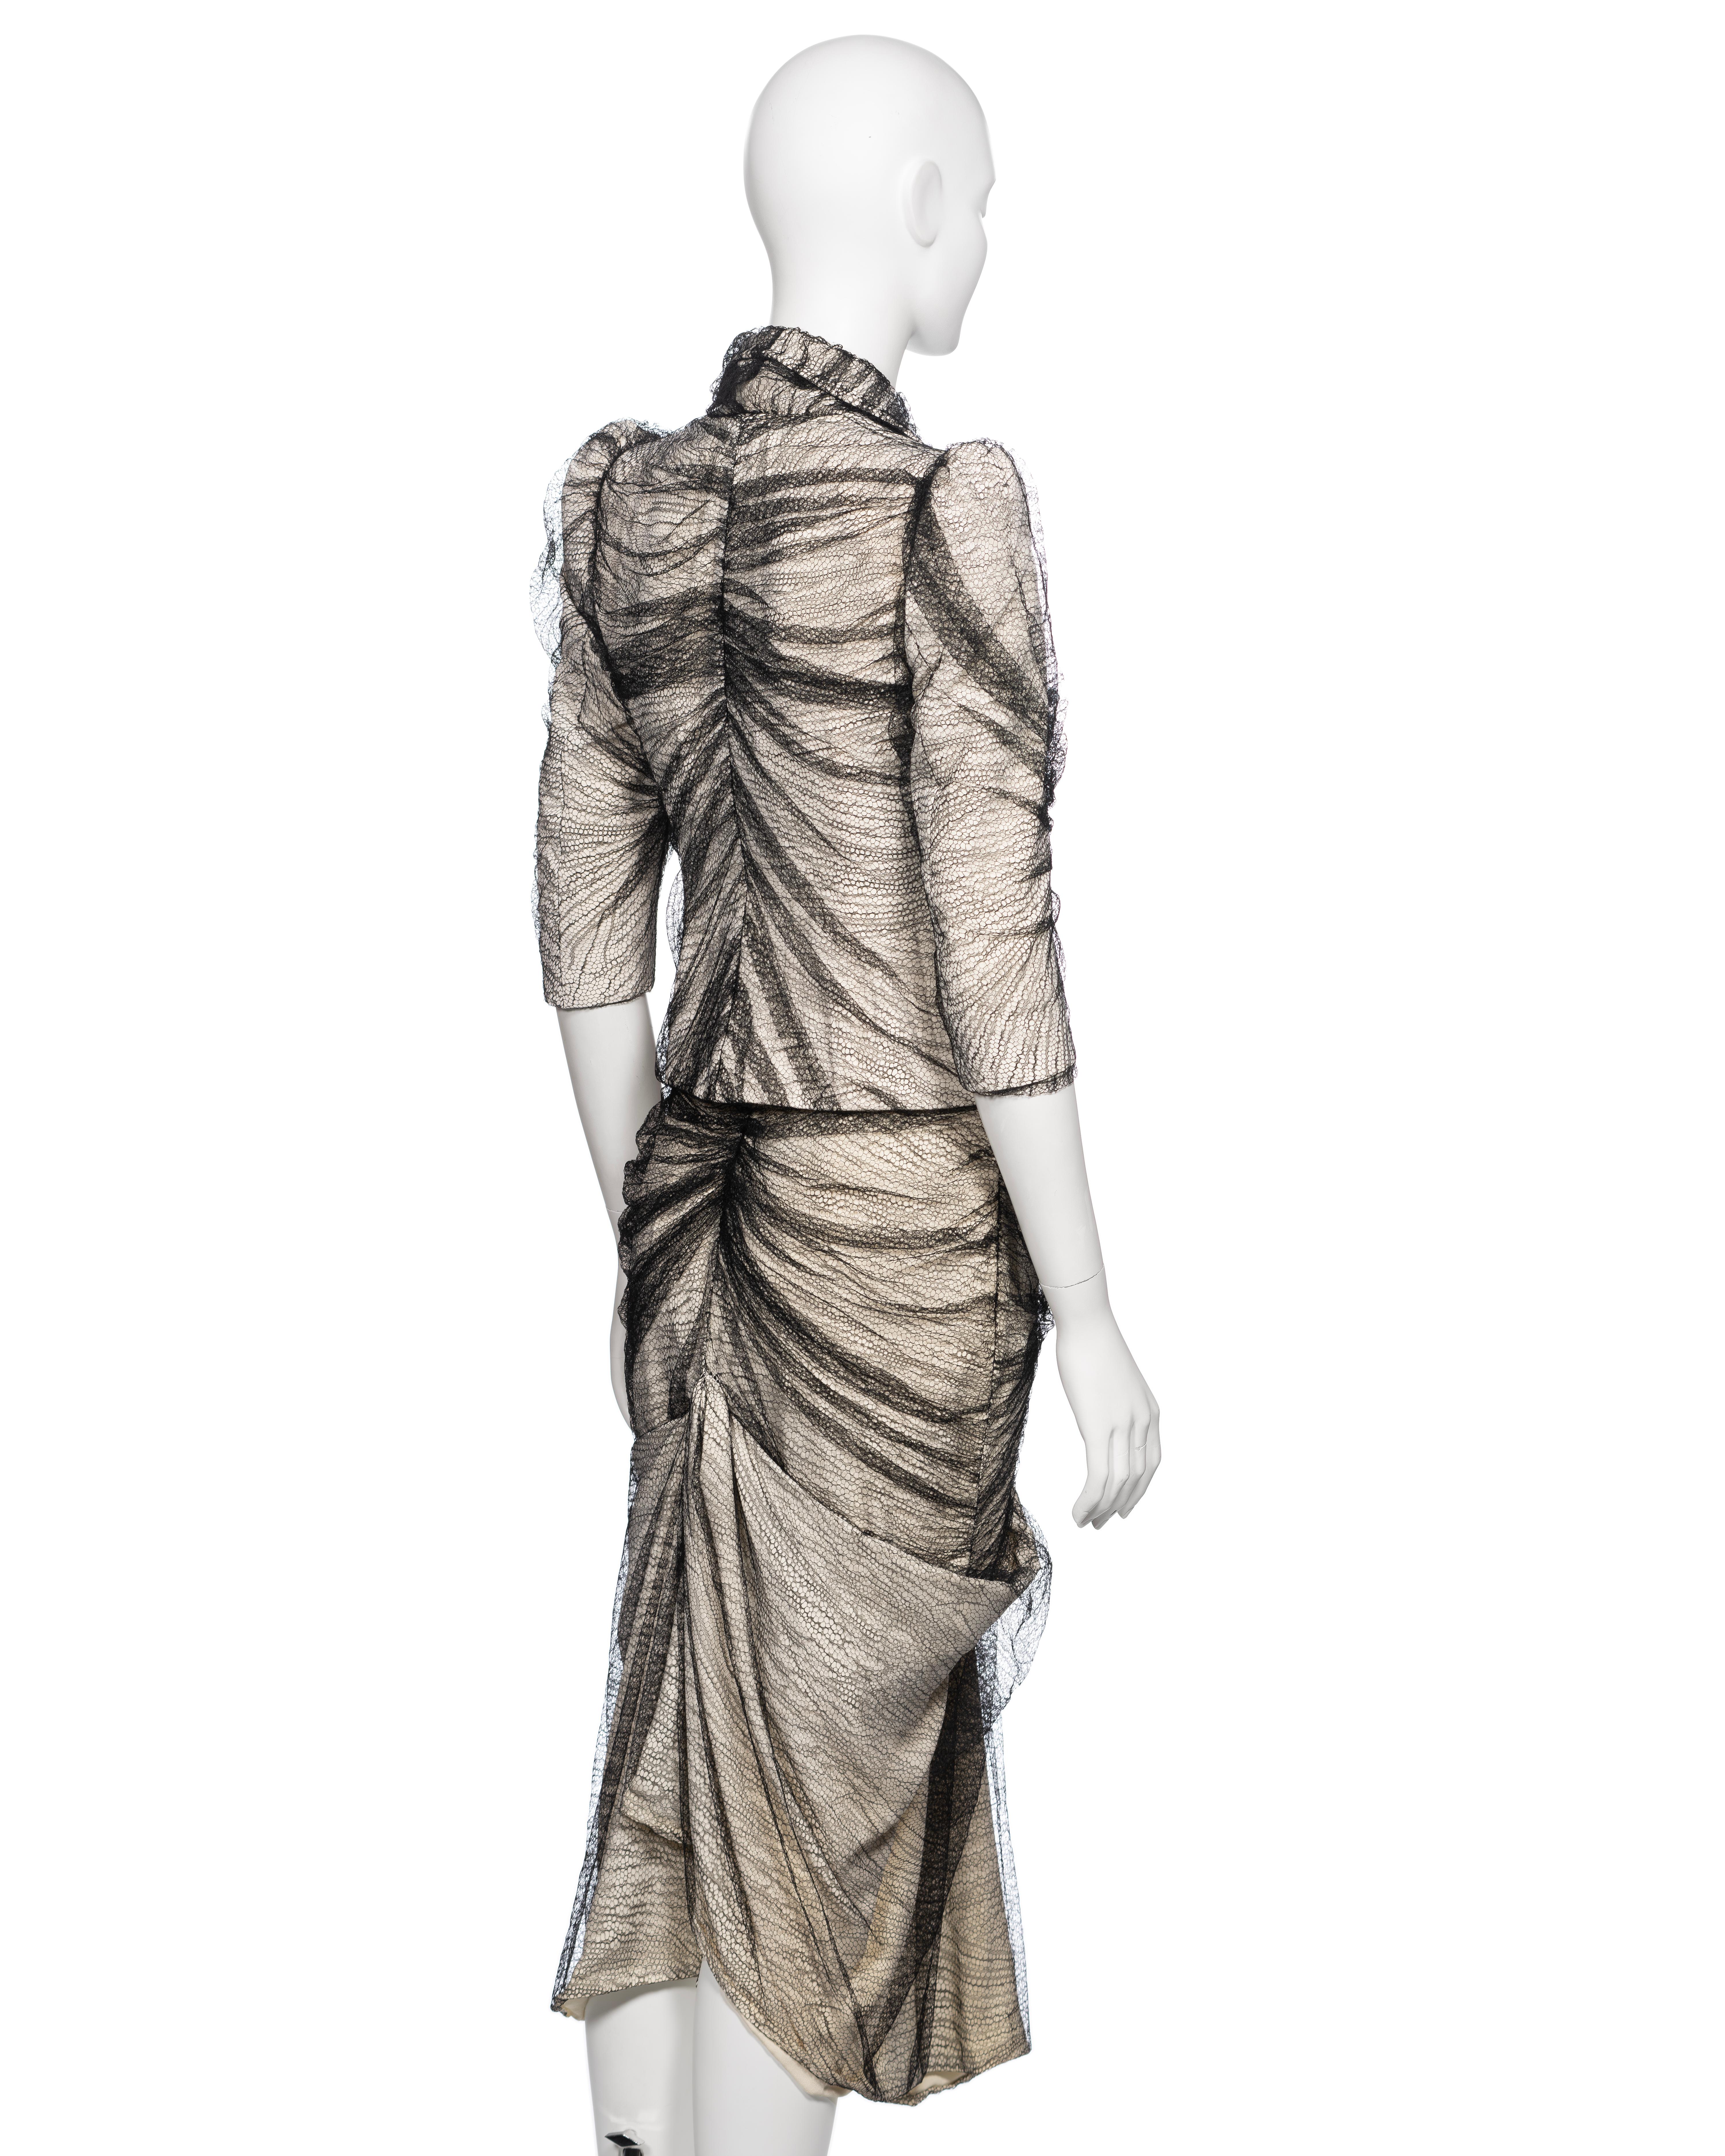 Alexander McQueen 'Sarabande' Ivory Skirt Suit with Black Lace Overlay, SS 2007 For Sale 5